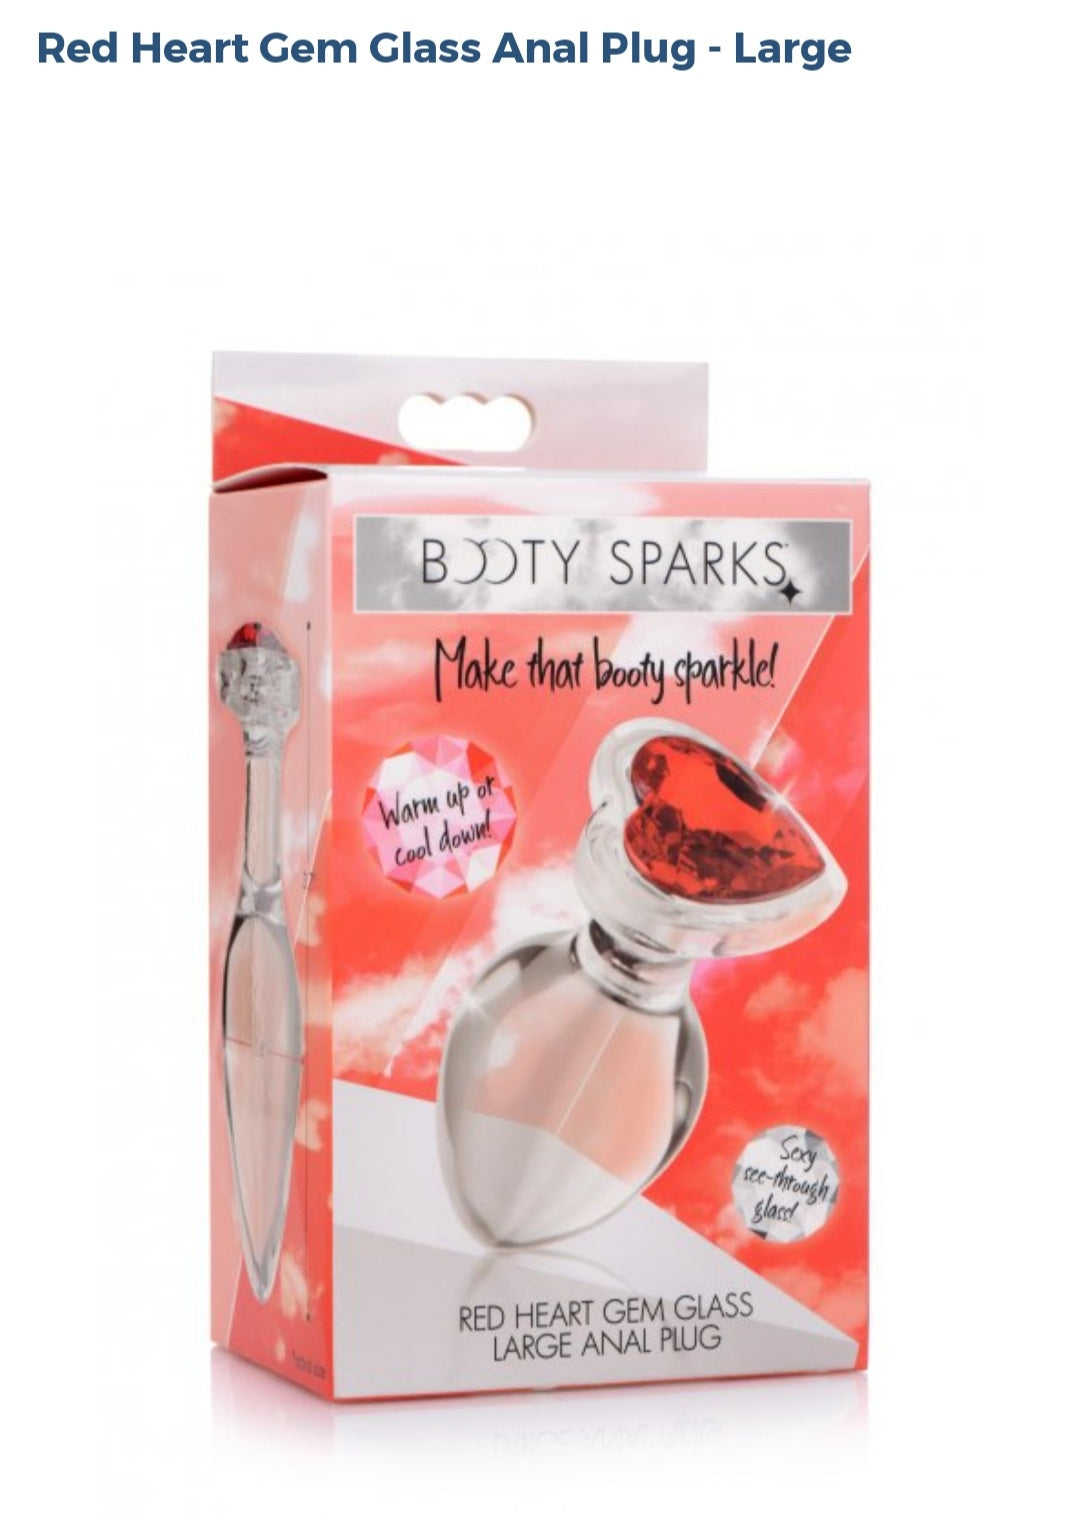 Booty Sparks Red Heart ❤ Gem Large Glass Anal Plug